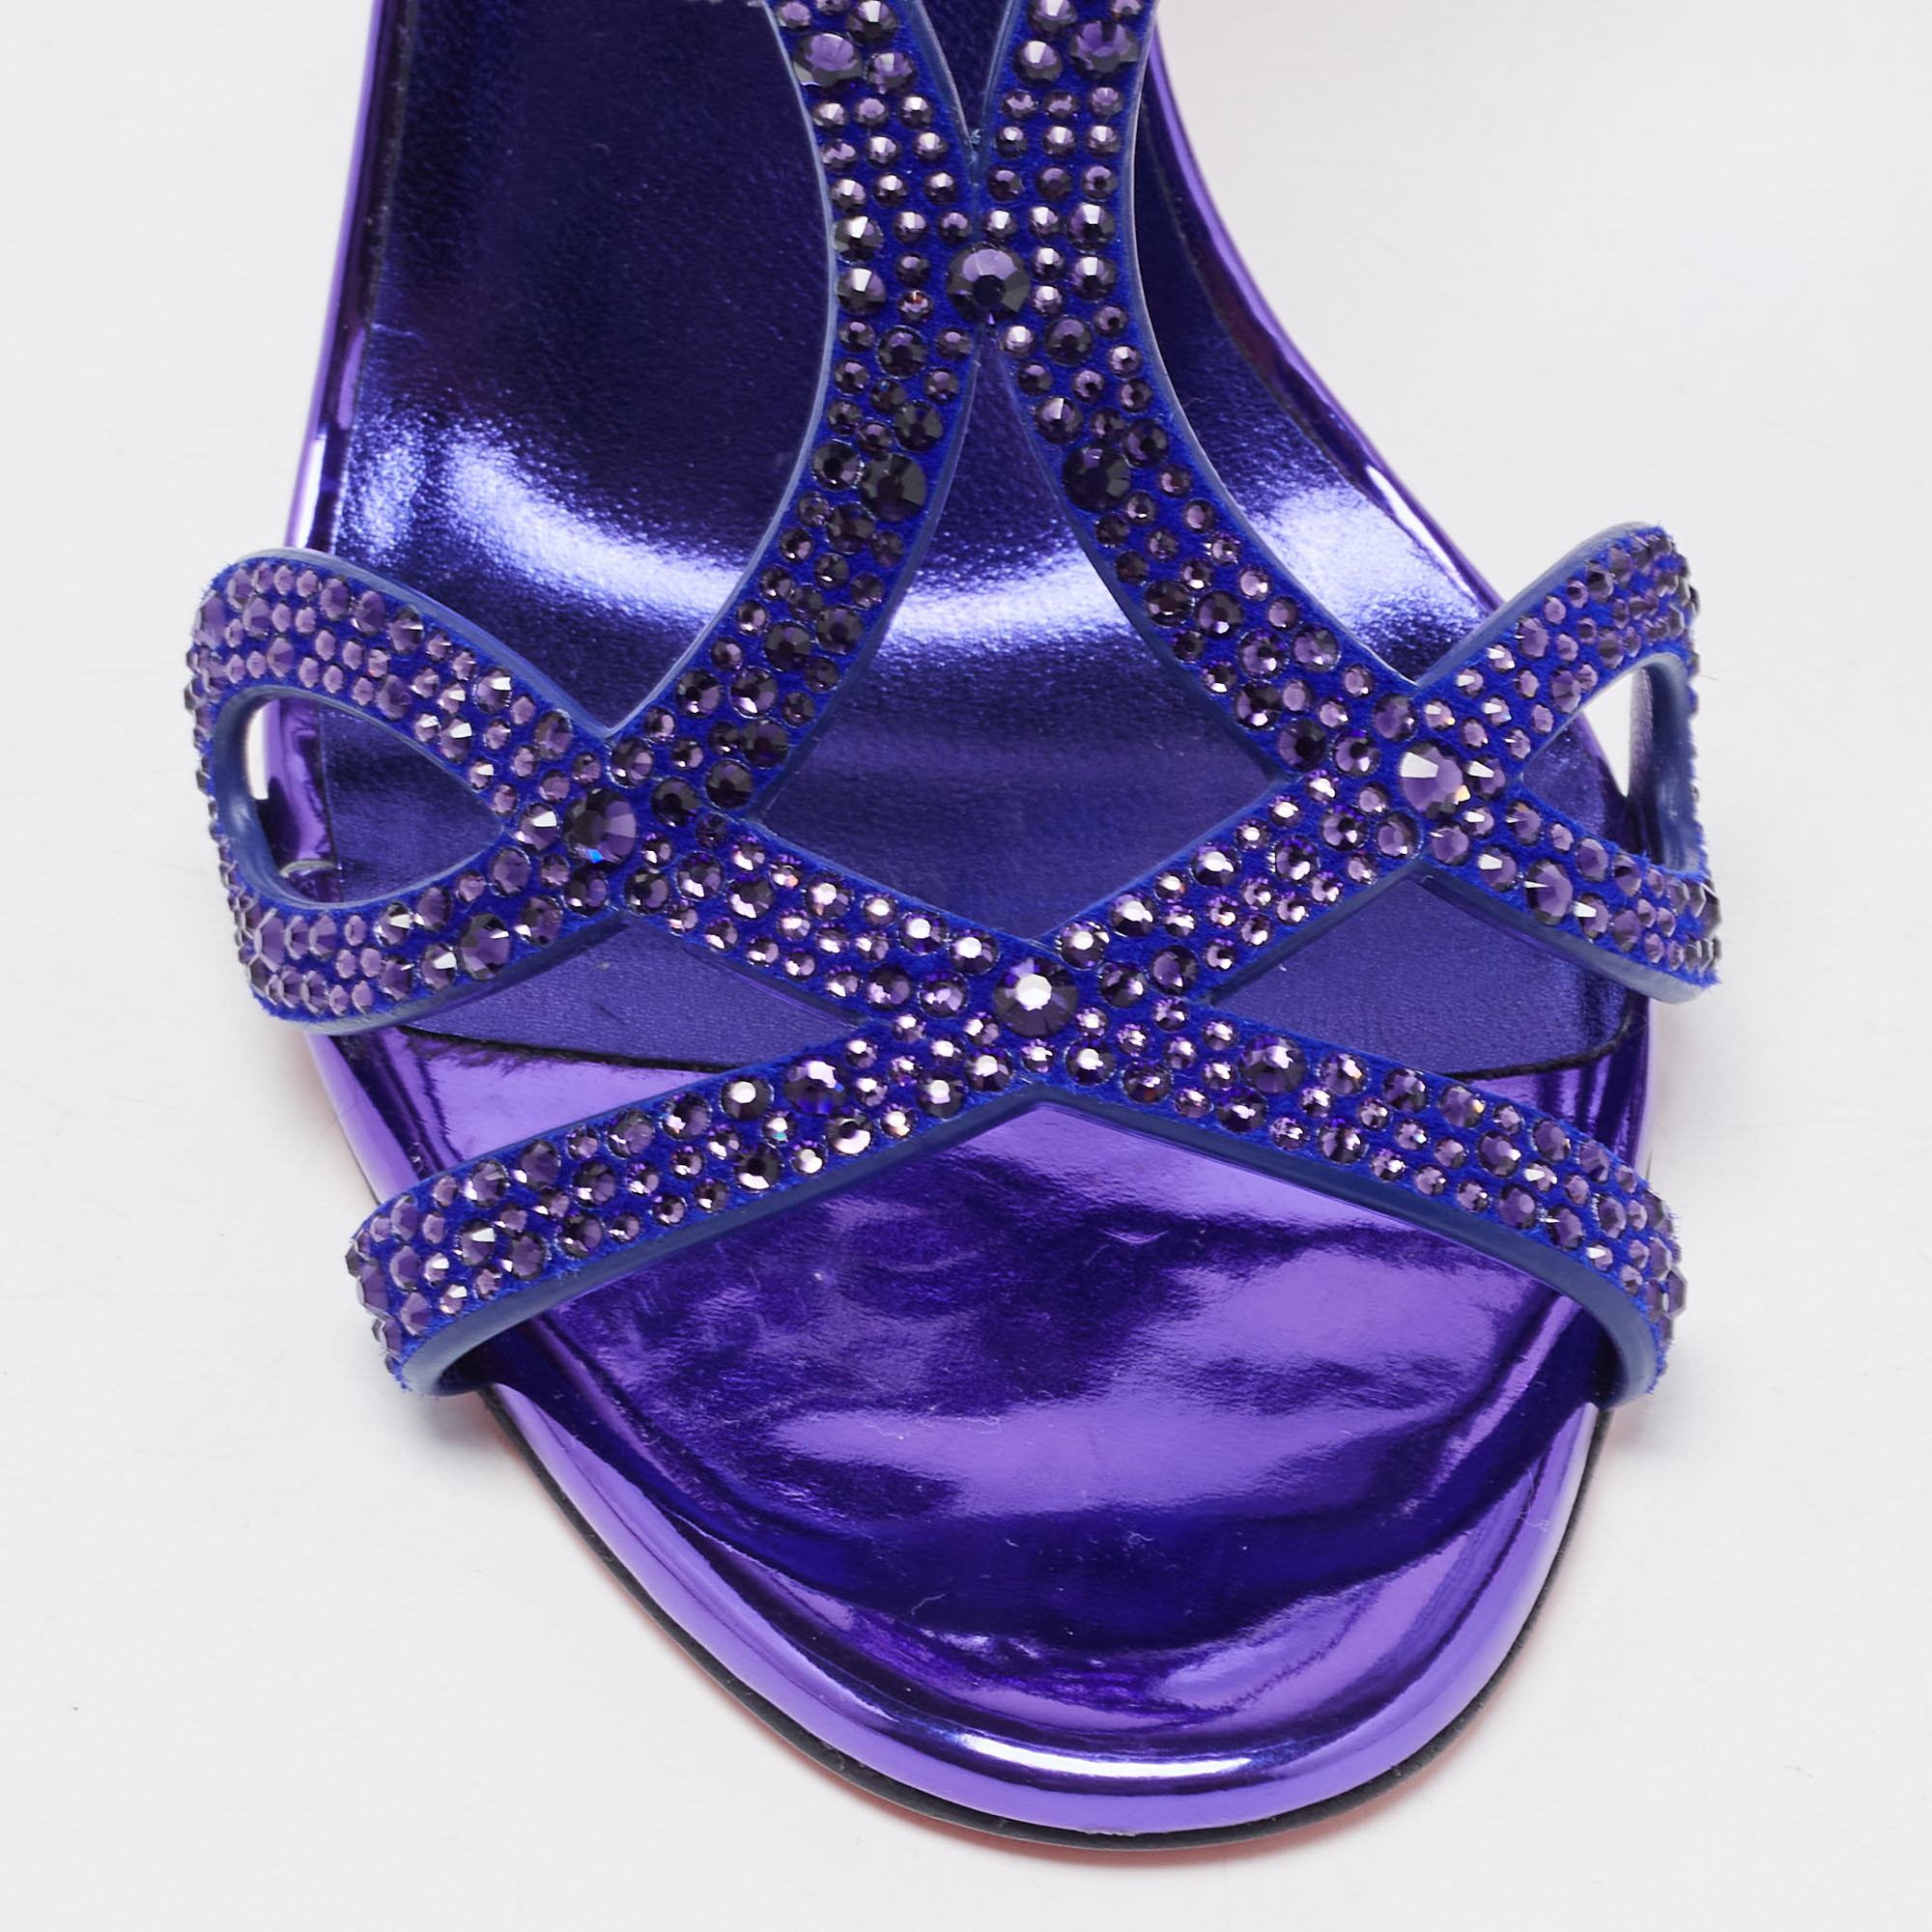 Christian Louboutin Purple Leather Double L Crystal Embellished Strass Sandals Size 39.5